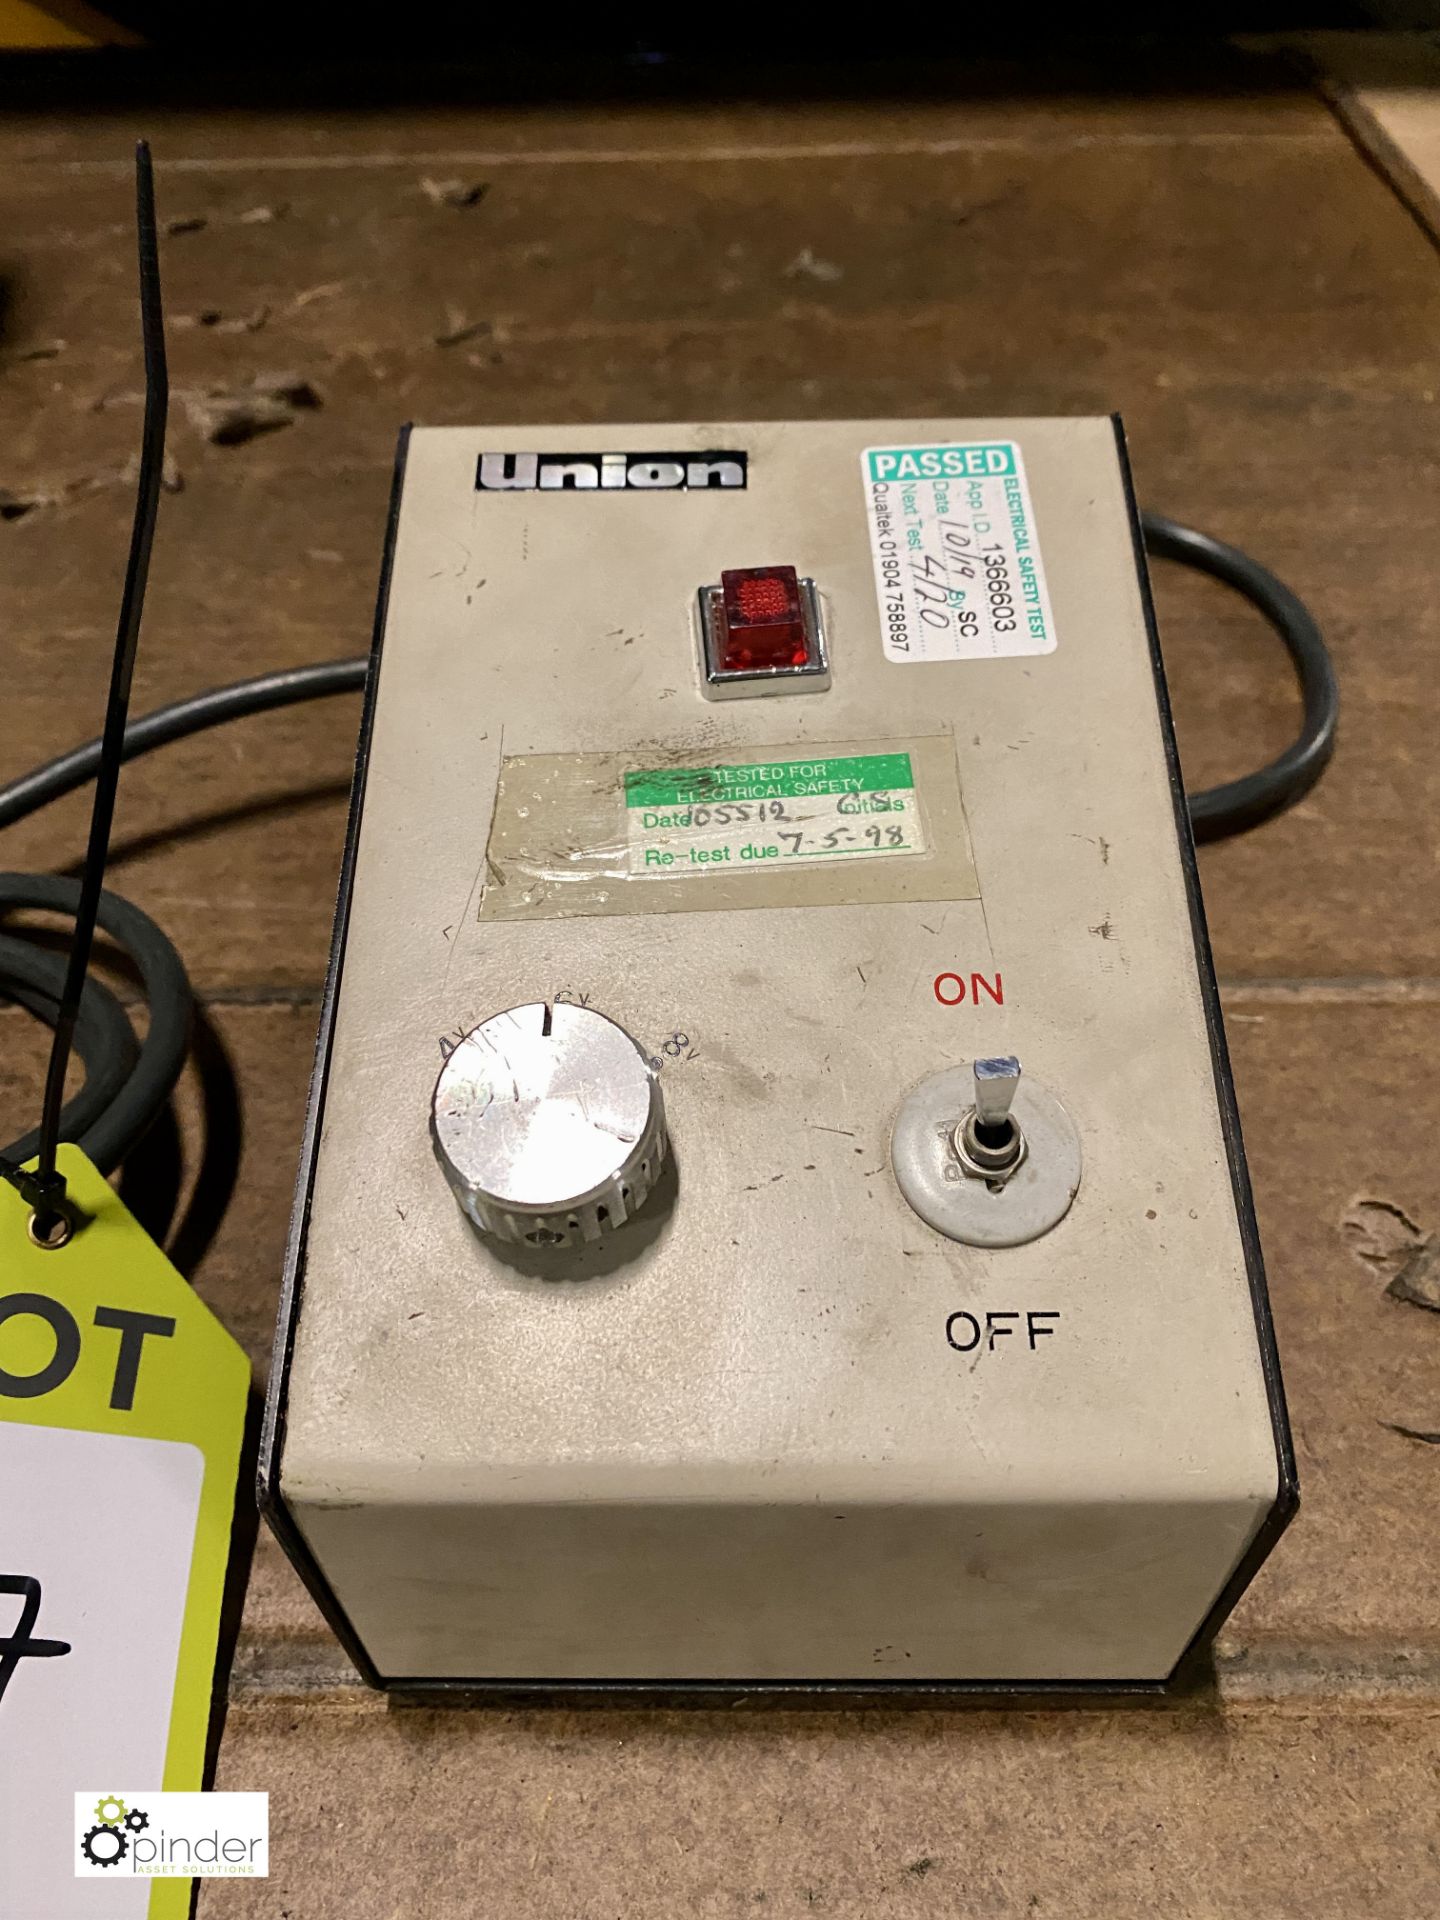 Union variable Power Supply, 4-8volts (please note